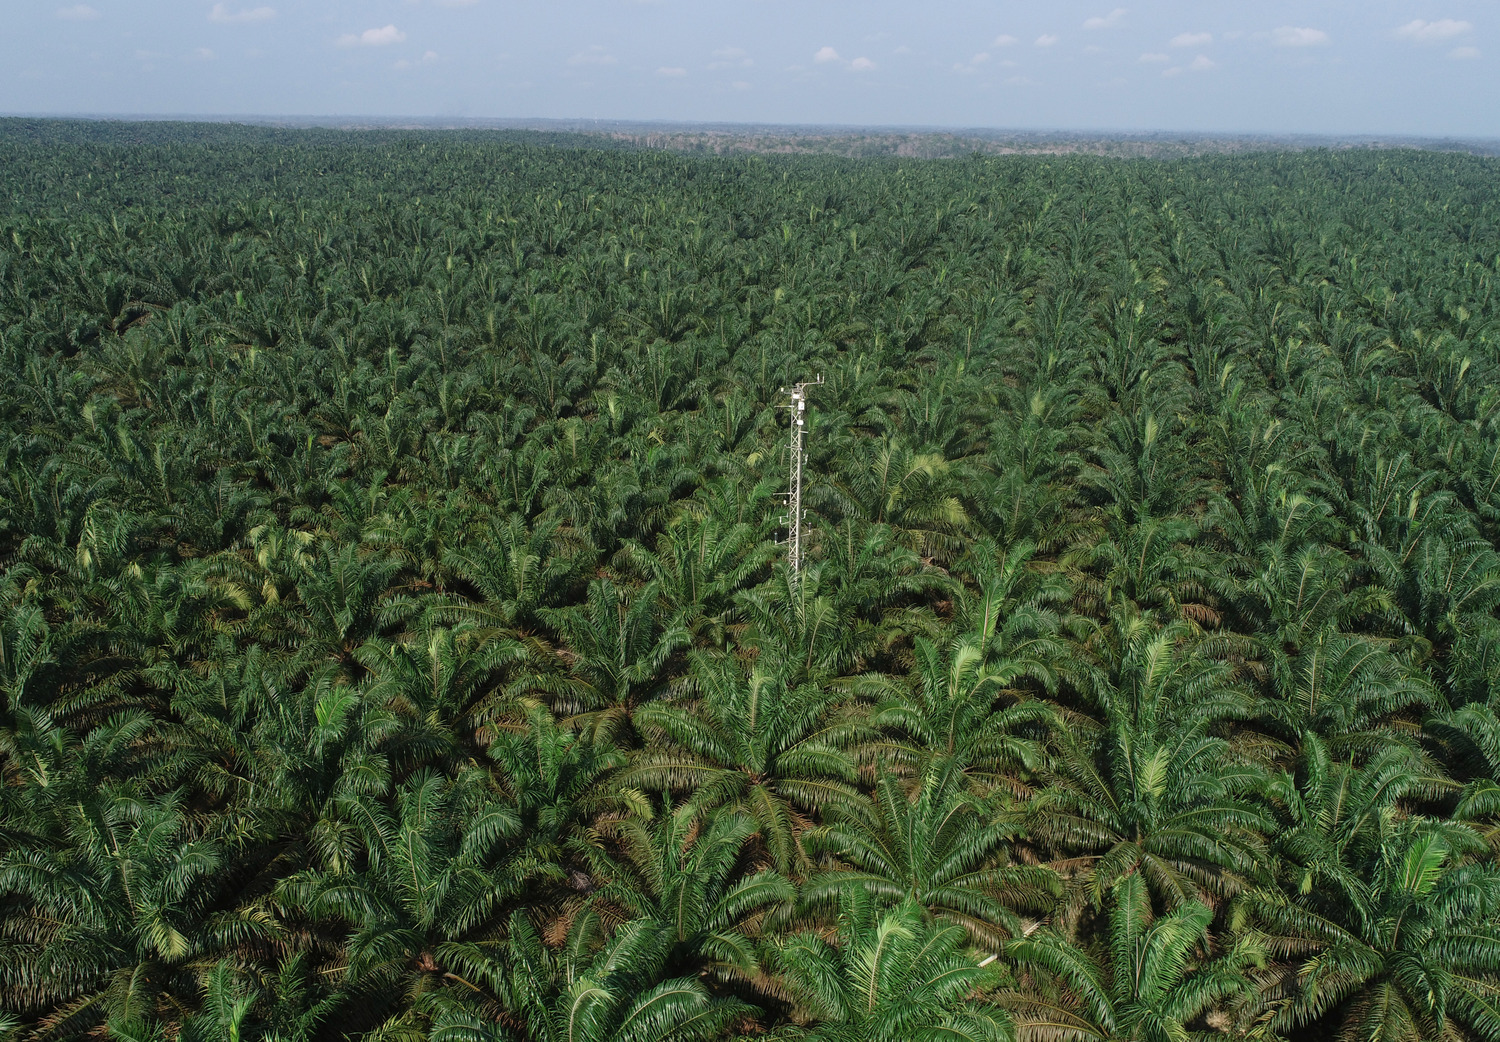 Drone view of oil palm plantation with flux tower to measure greenhouse gases.